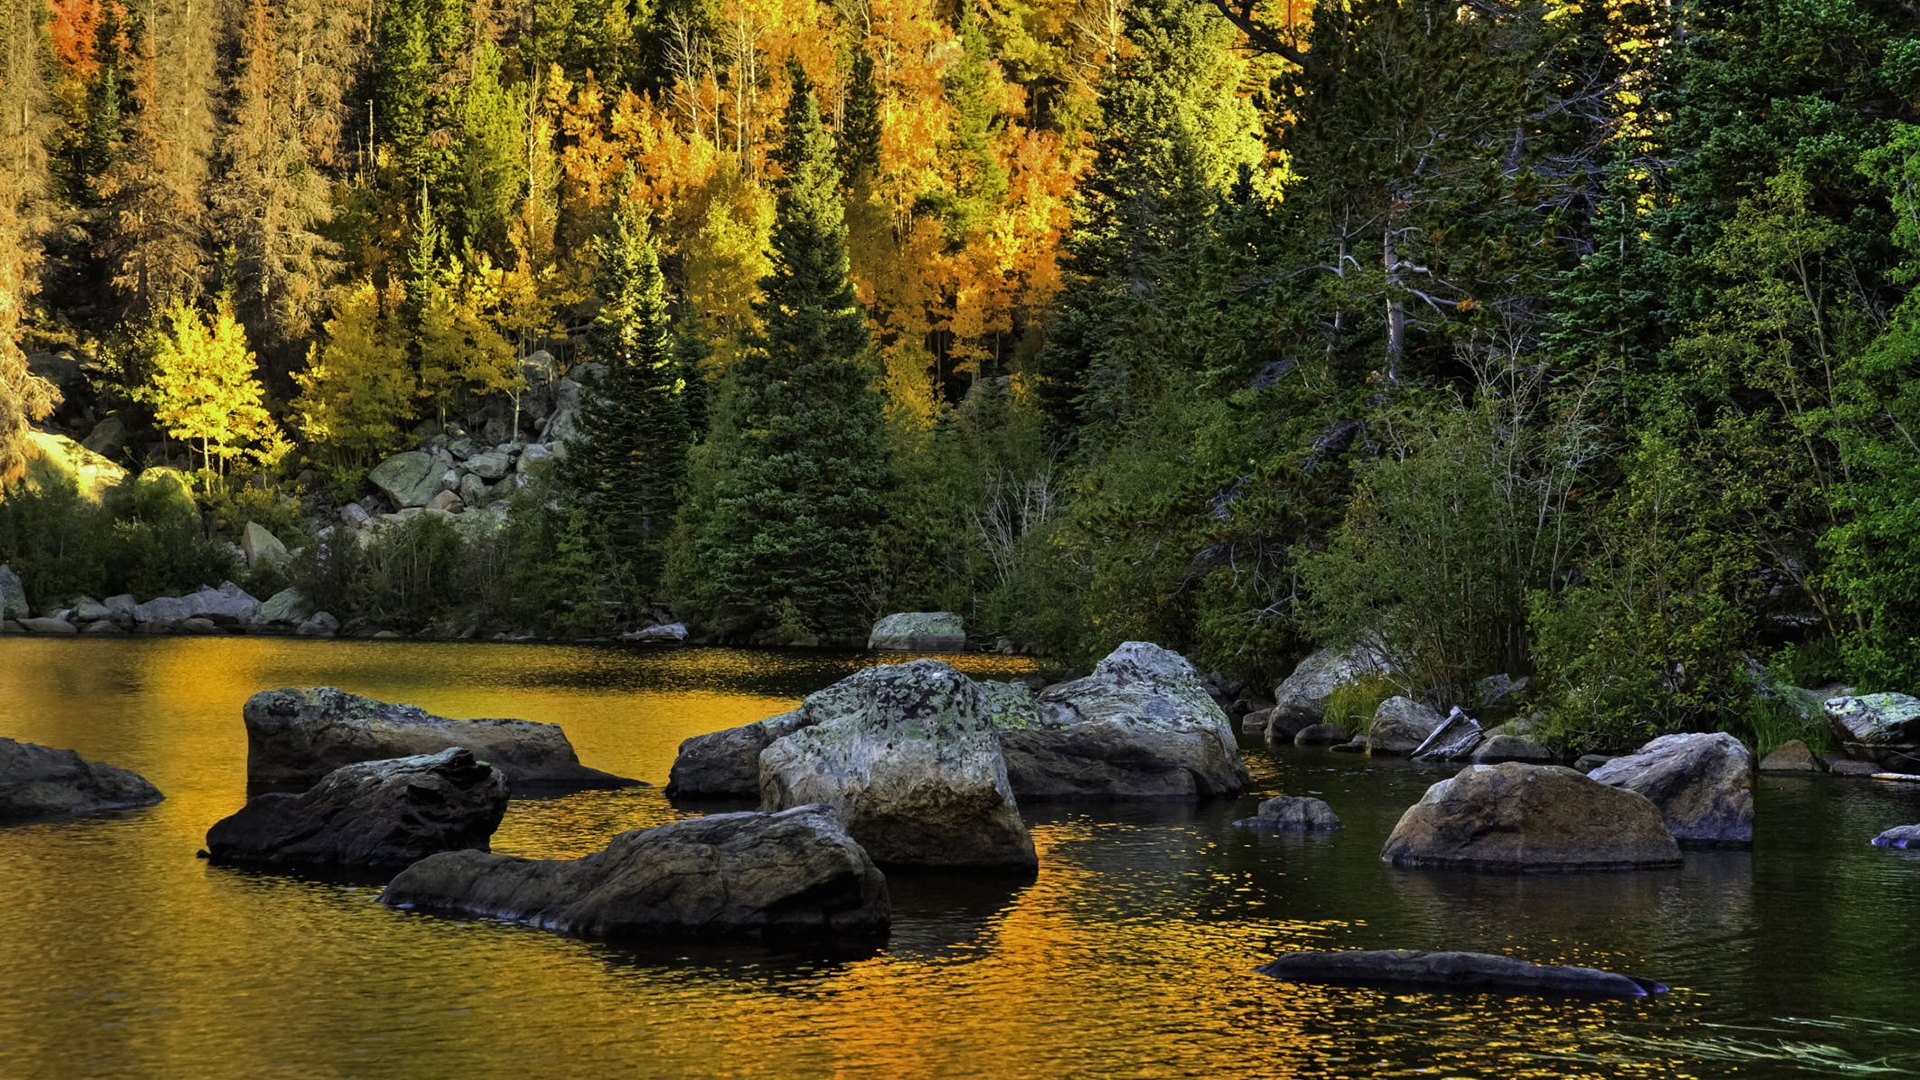 Stones On River Surrounded By Yellow Green Orange Autumn Leaves Trees Forest With Sunrays During Daytime HD Autumn